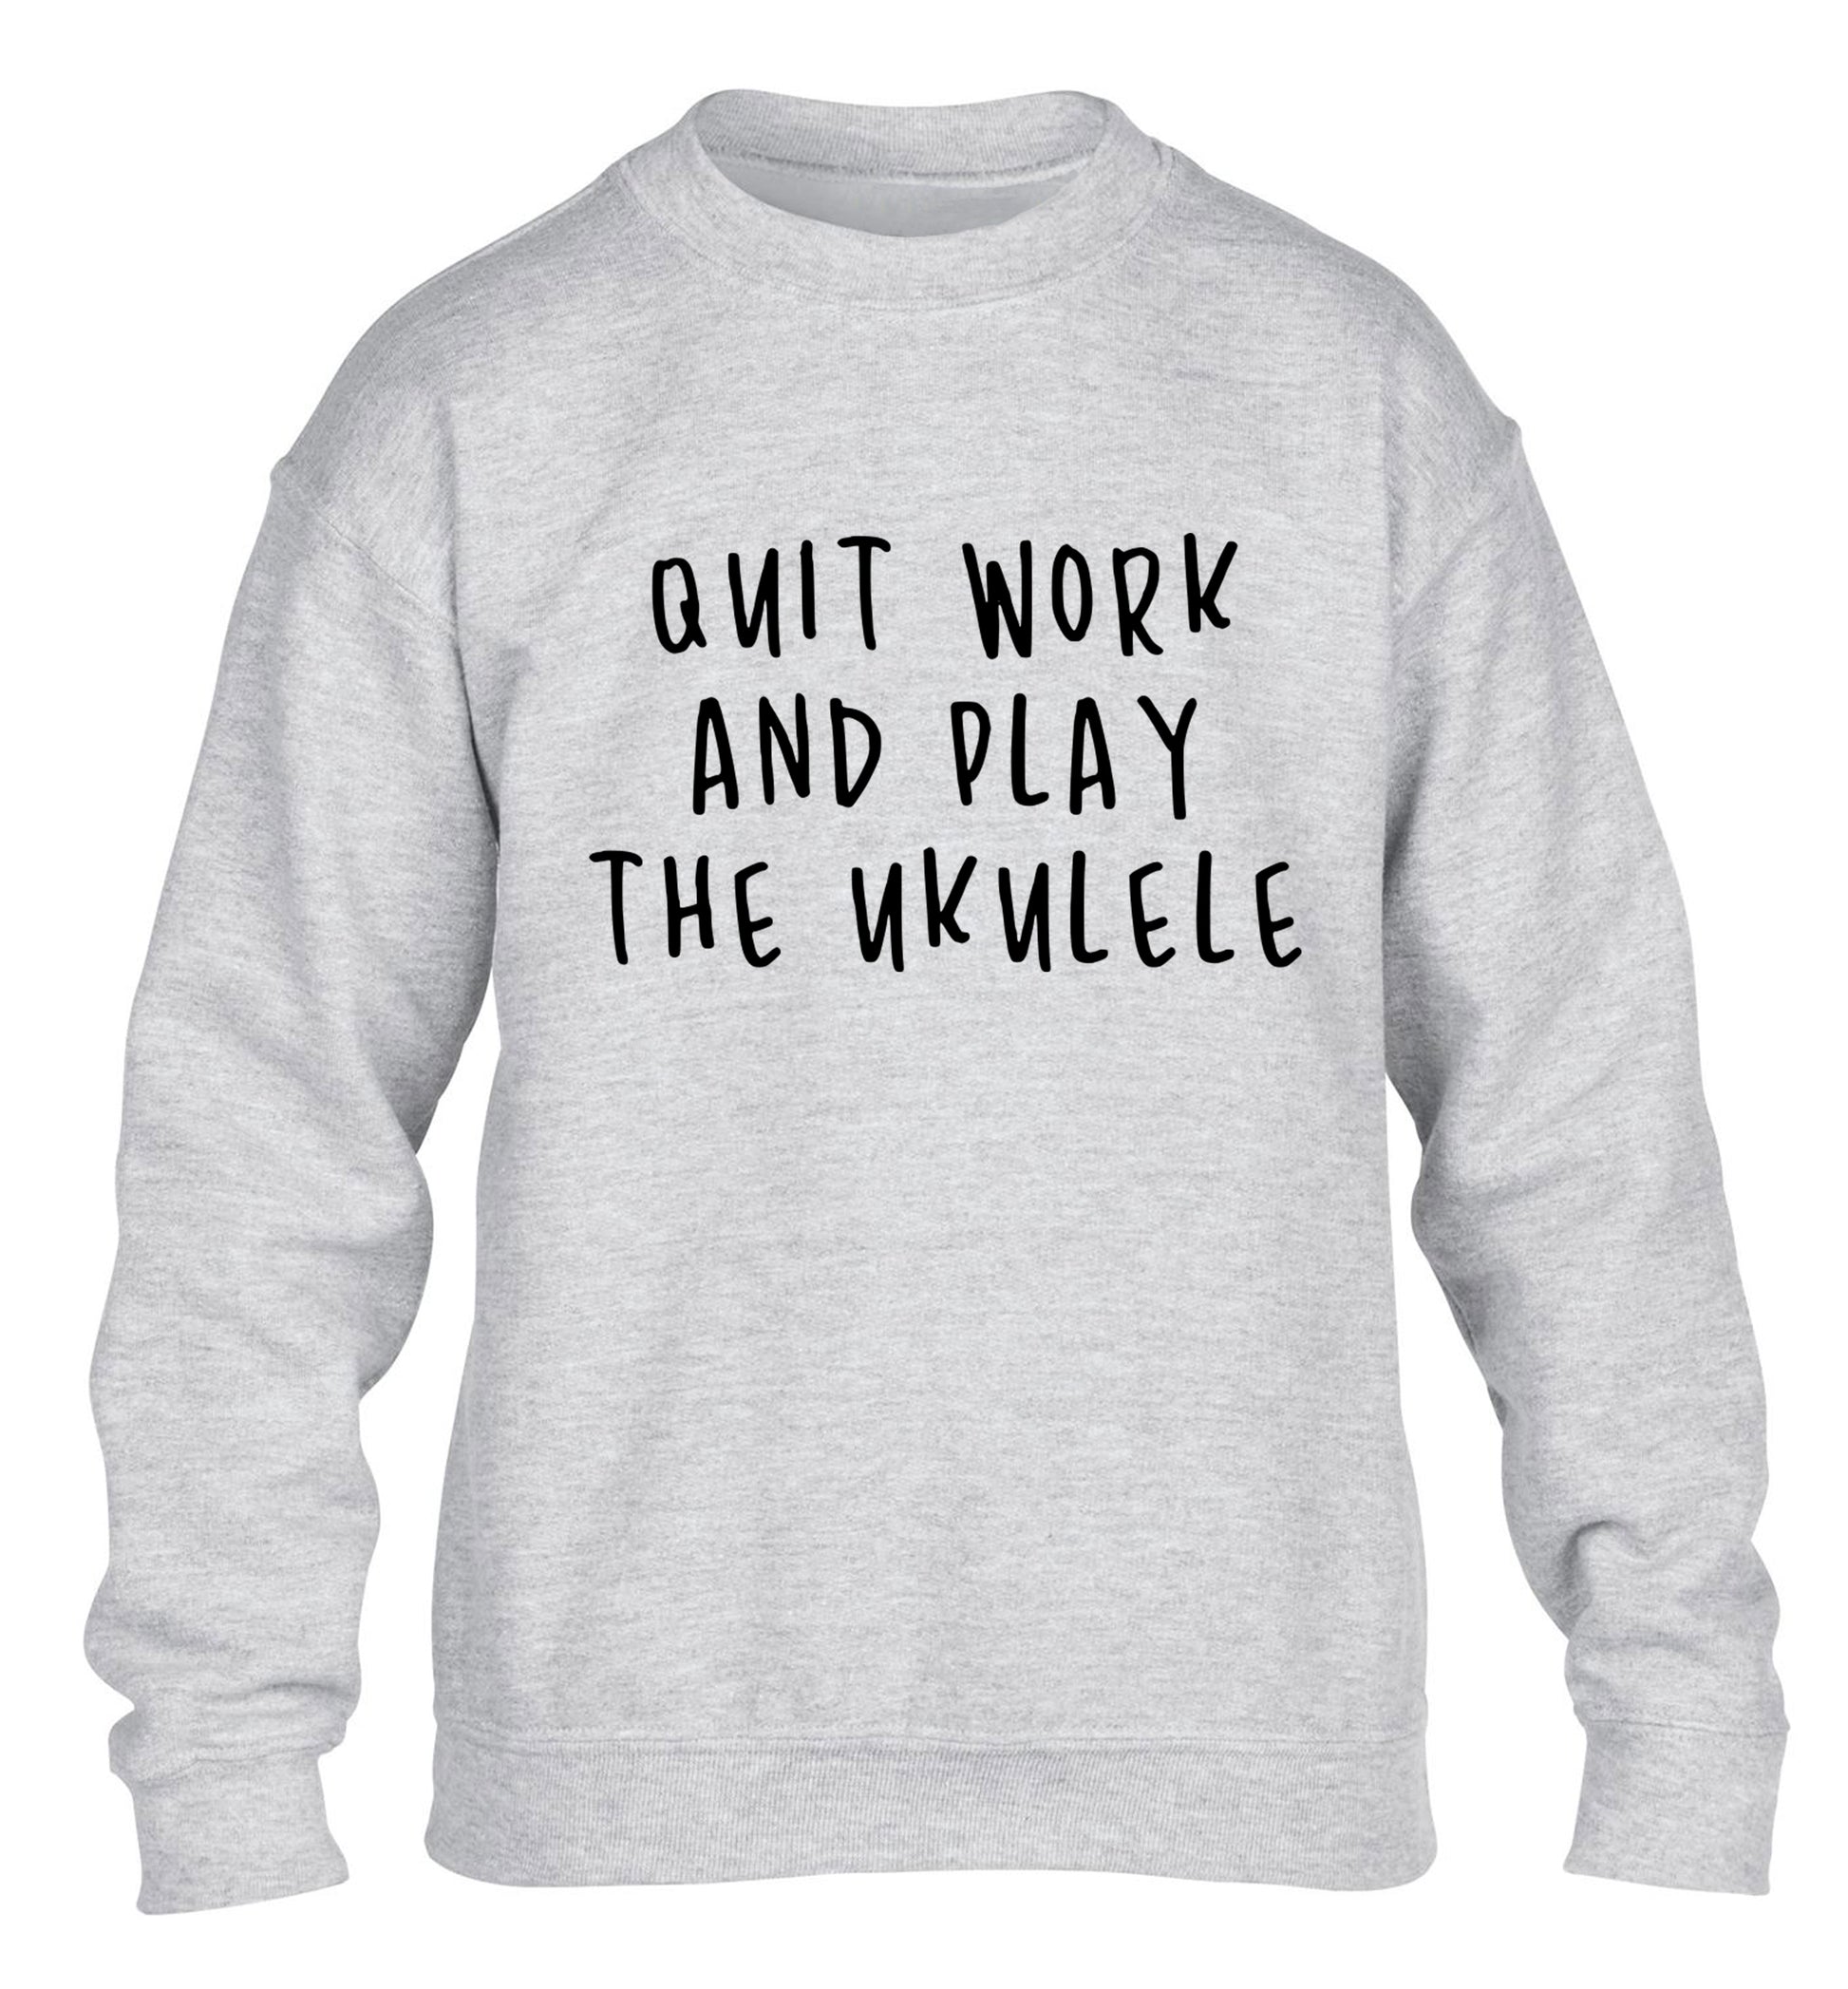 Quit work and play the ukulele children's grey sweater 12-14 Years